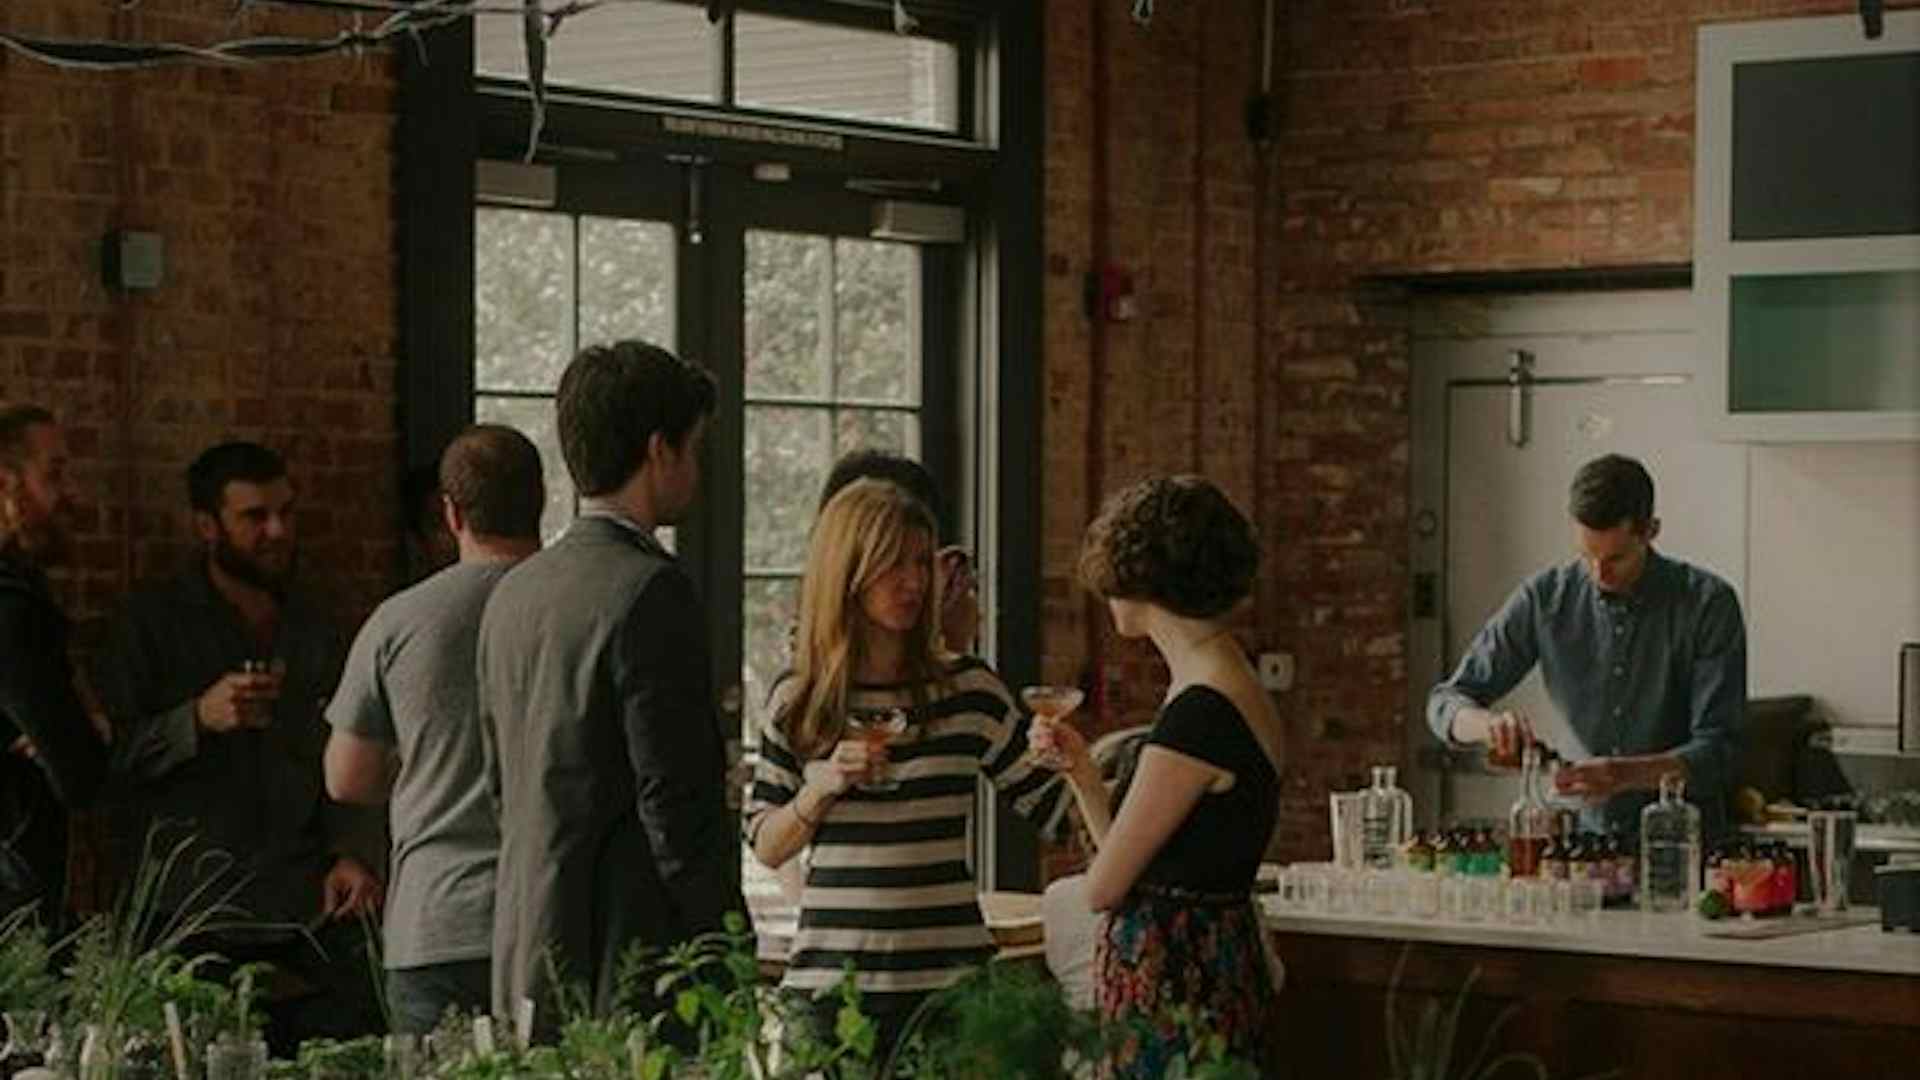 11 Techniques That Will Make You Better At Networking